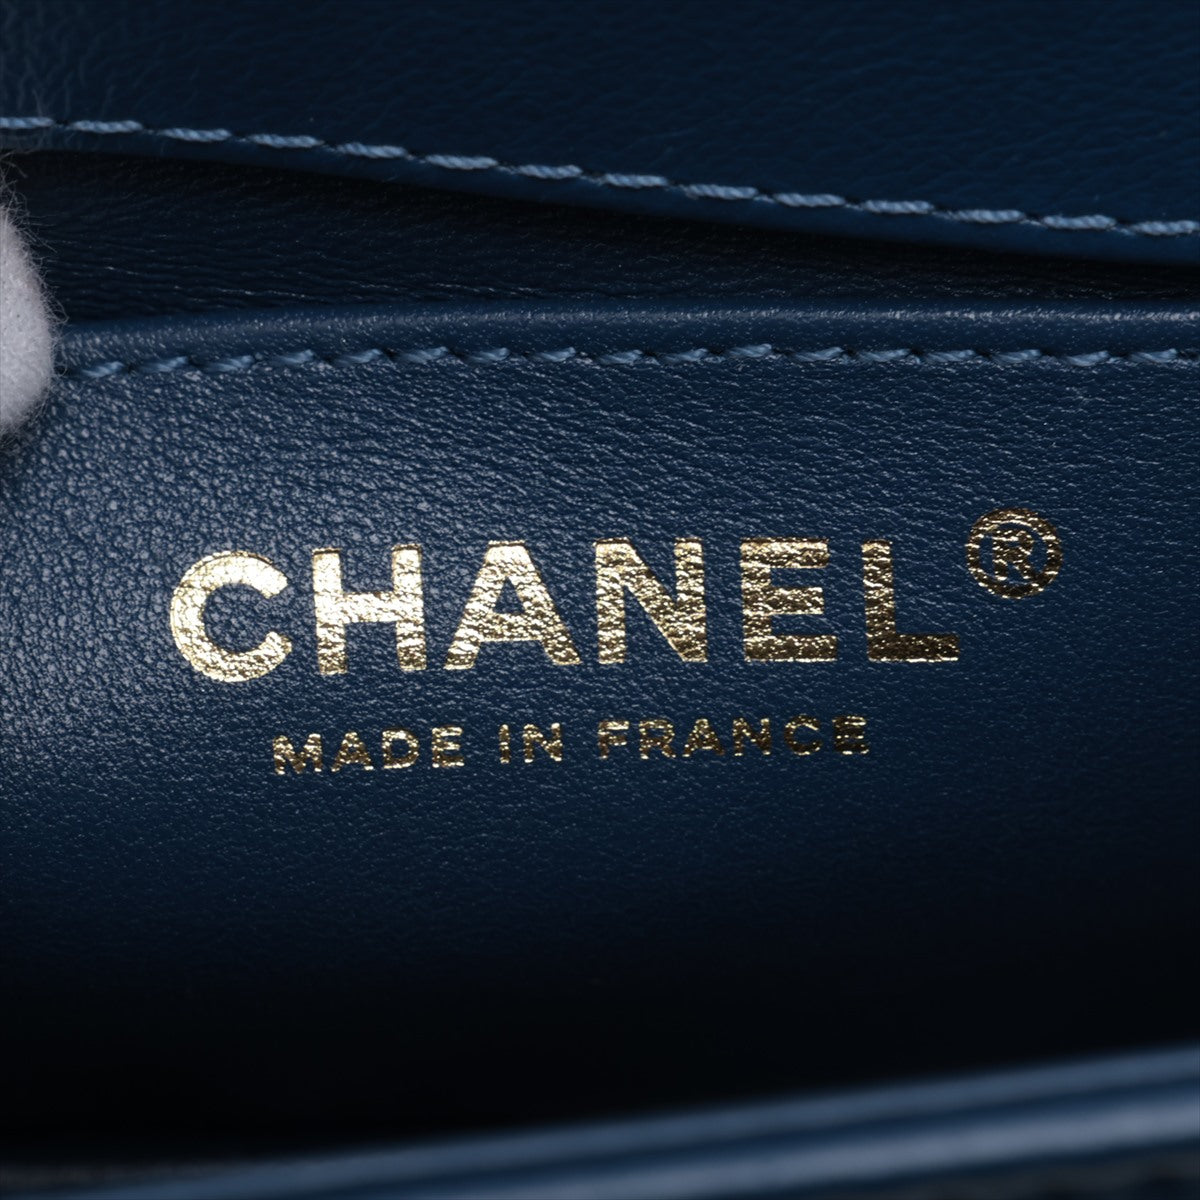 Chanel Boy Chanel 20 Small Chain Leather Shoulder Bag Blue G  A67085